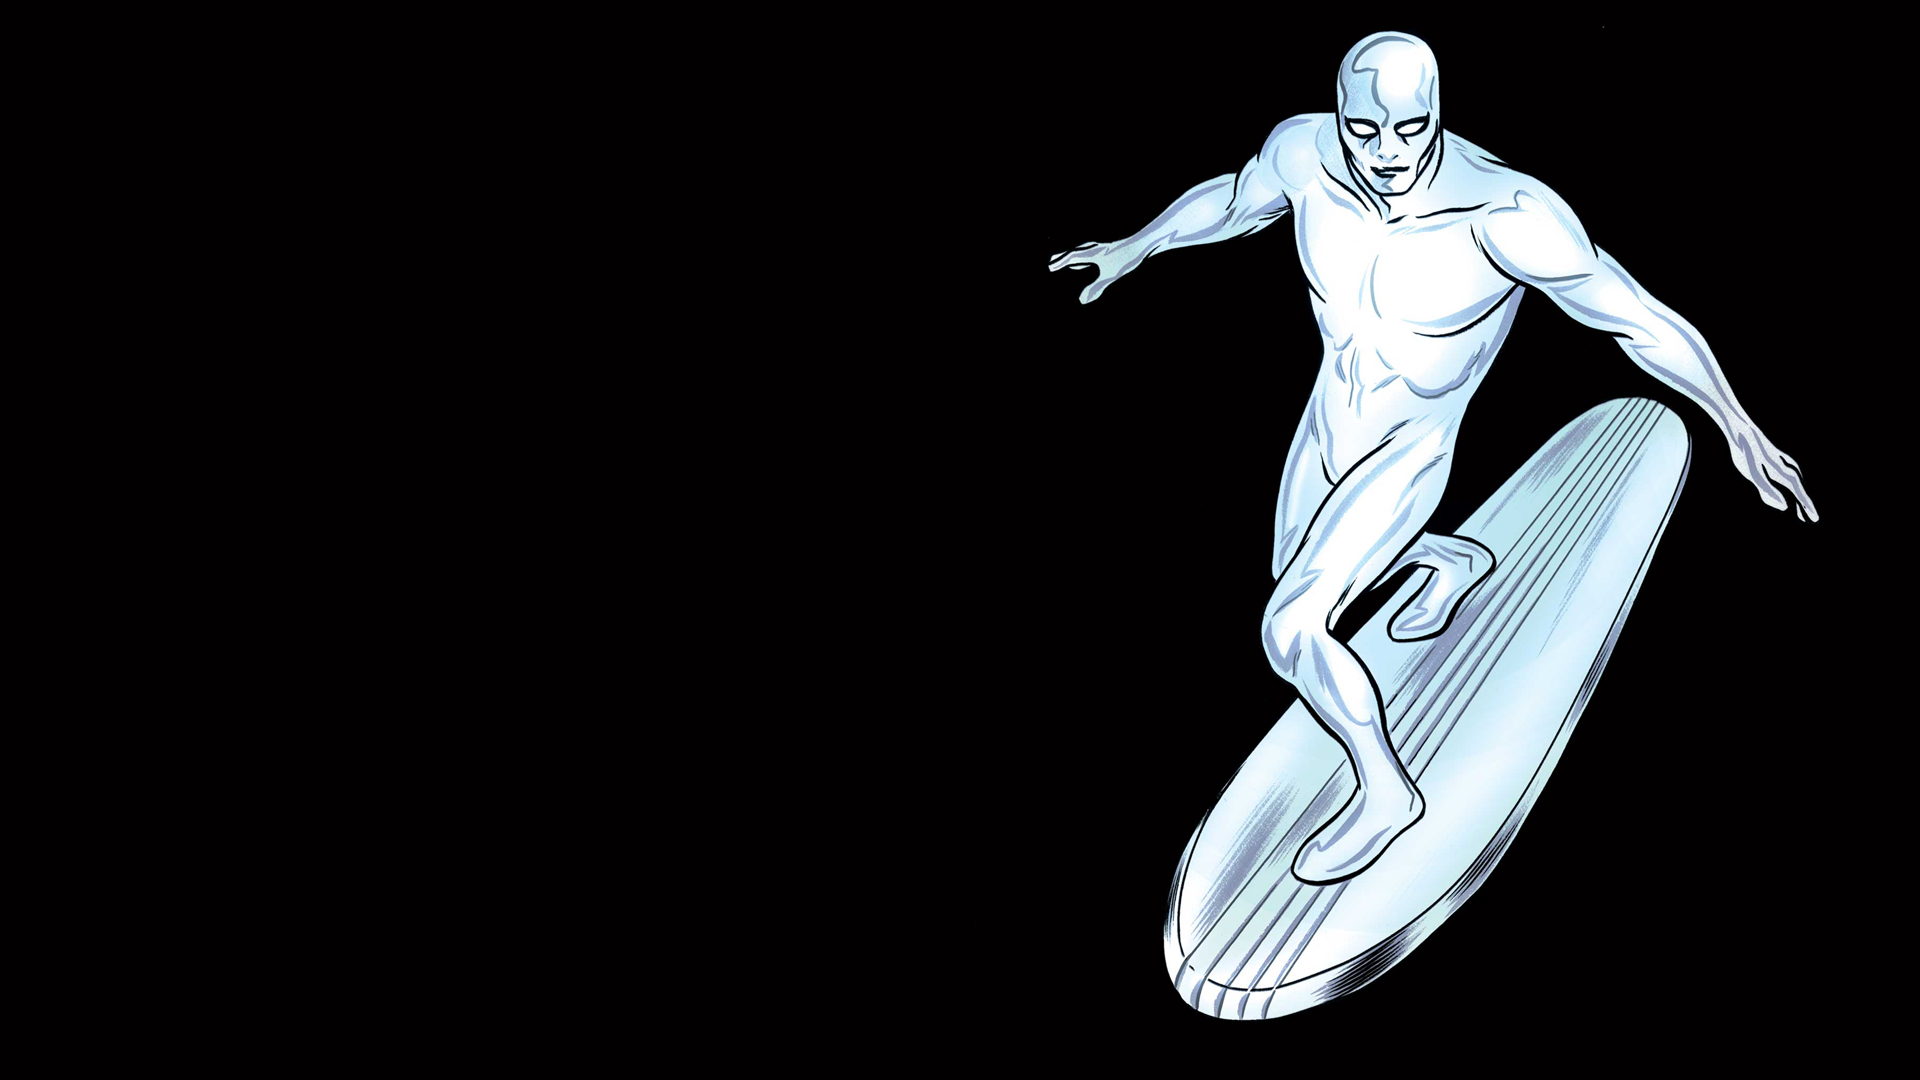 Silver Surfer Wallpaper Pictures For